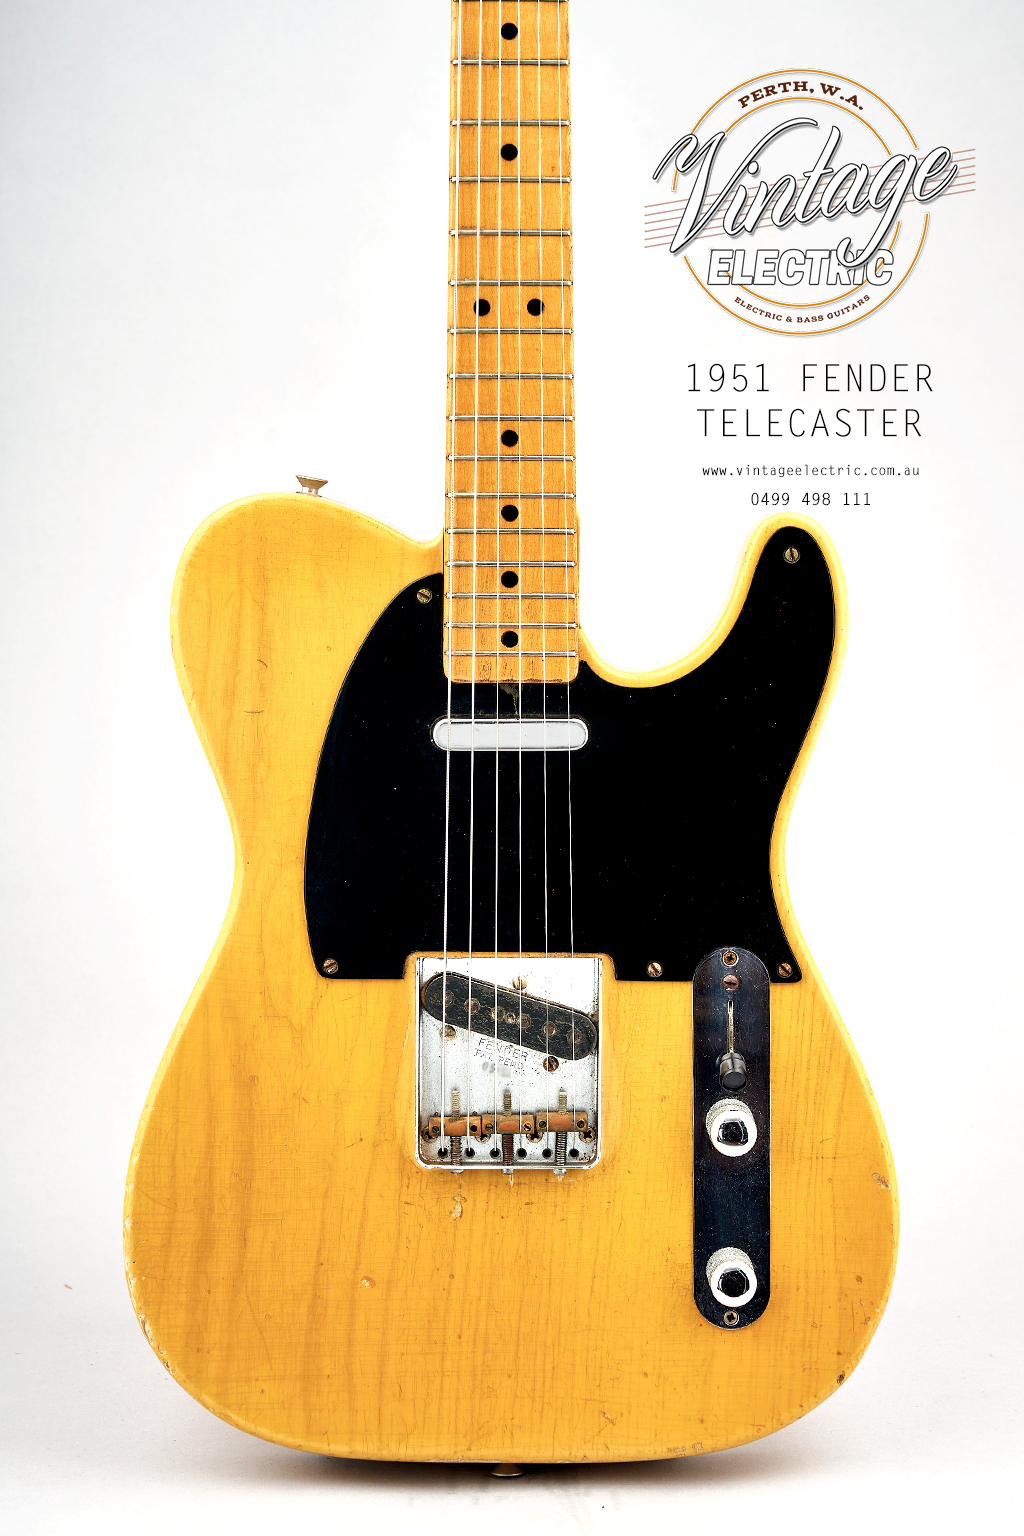 1951 Fender Telecaster Body in Butterscothch Finish